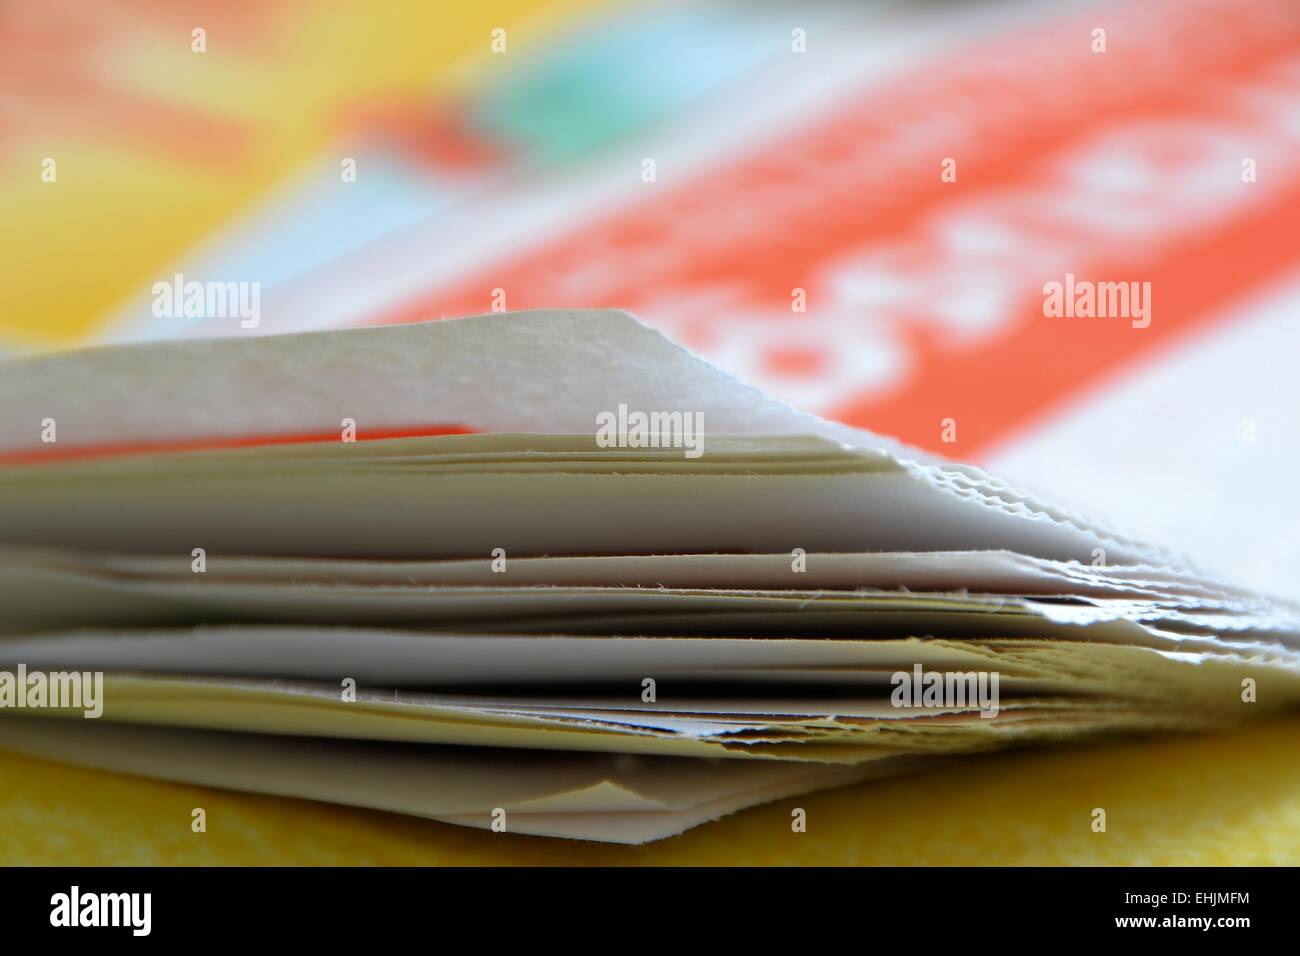 a newspaper lying on a table Stock Photo